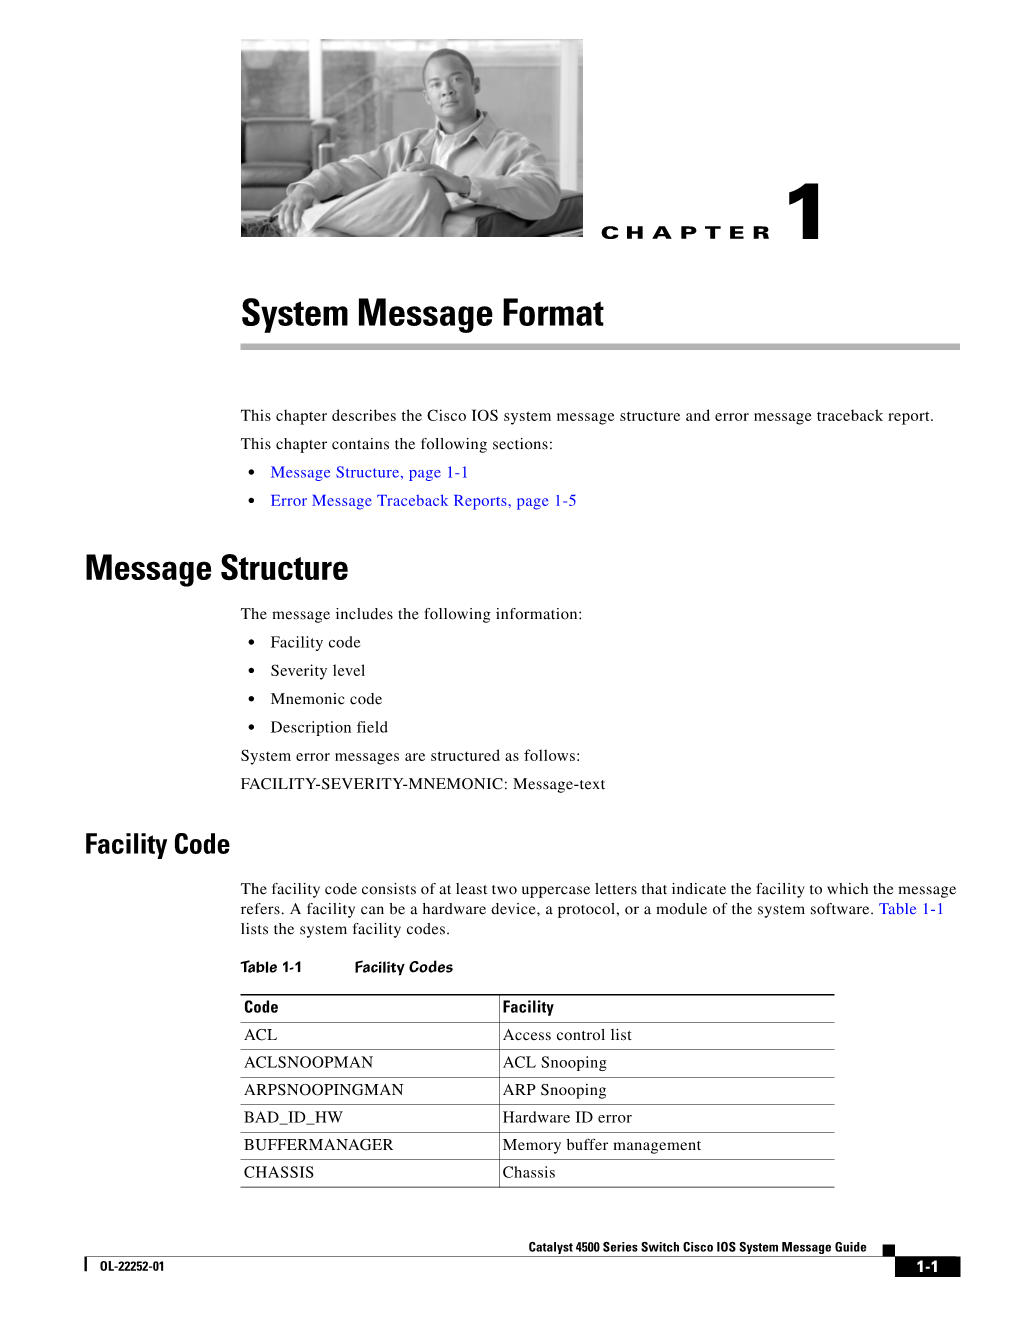 System Message Format